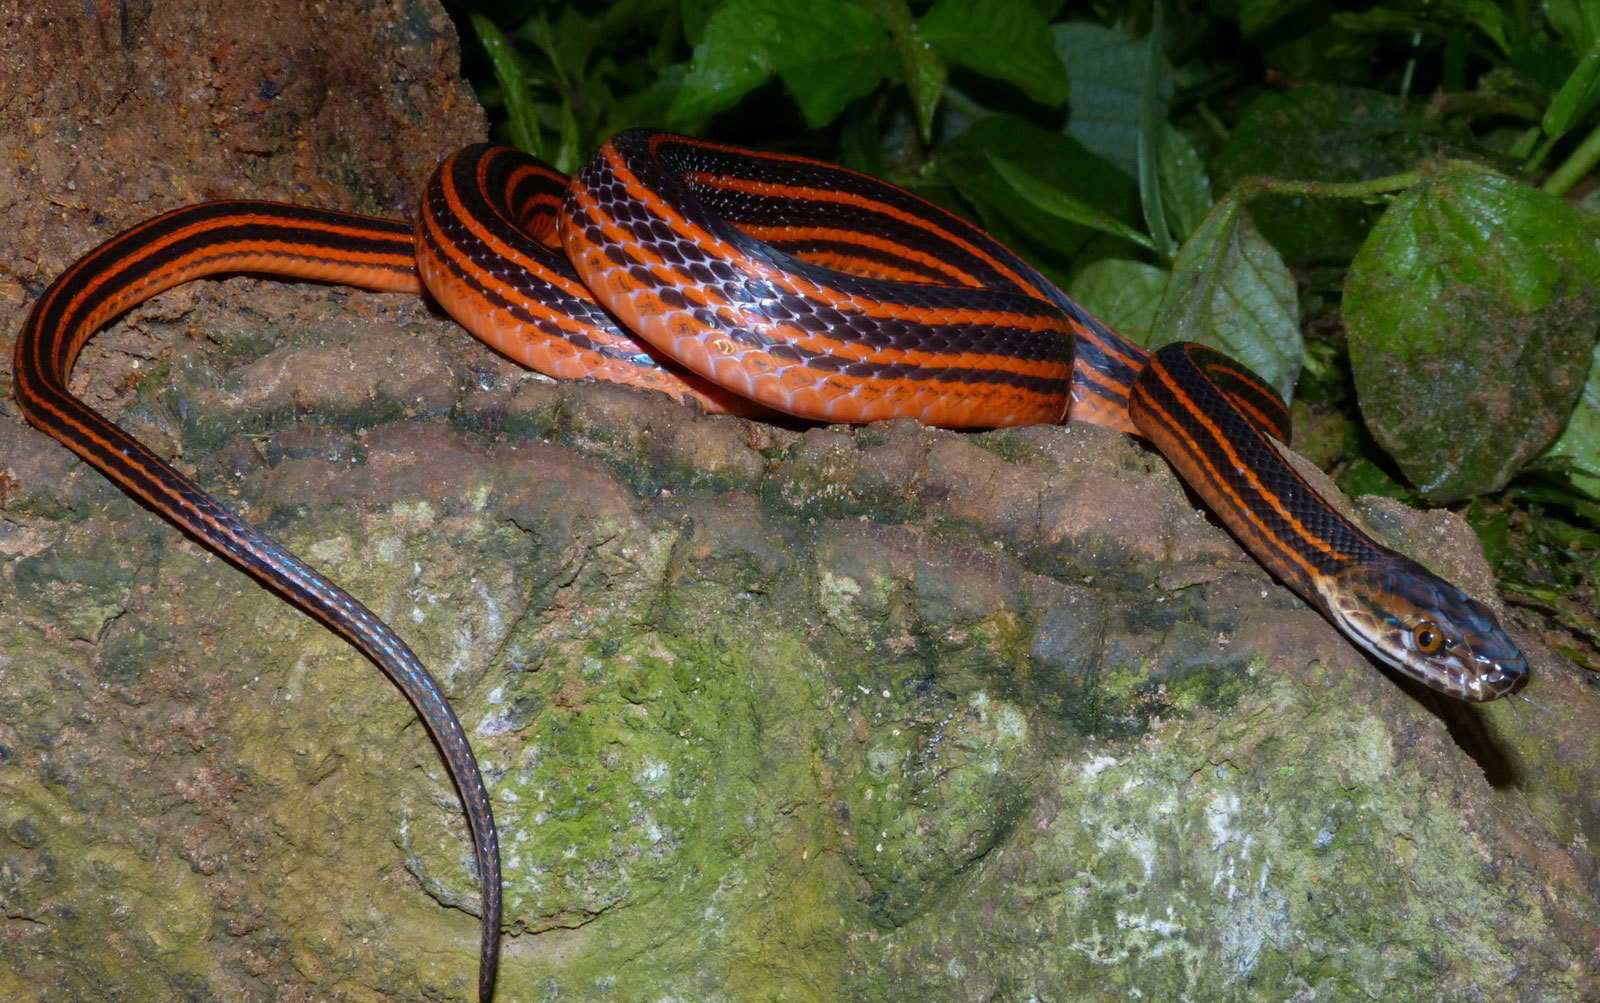 Book of Animals: Red and Black Striped Snake - My, Snake, Animal book, Animals, May 9, Wild animals, Longpost, May 9 - Victory Day